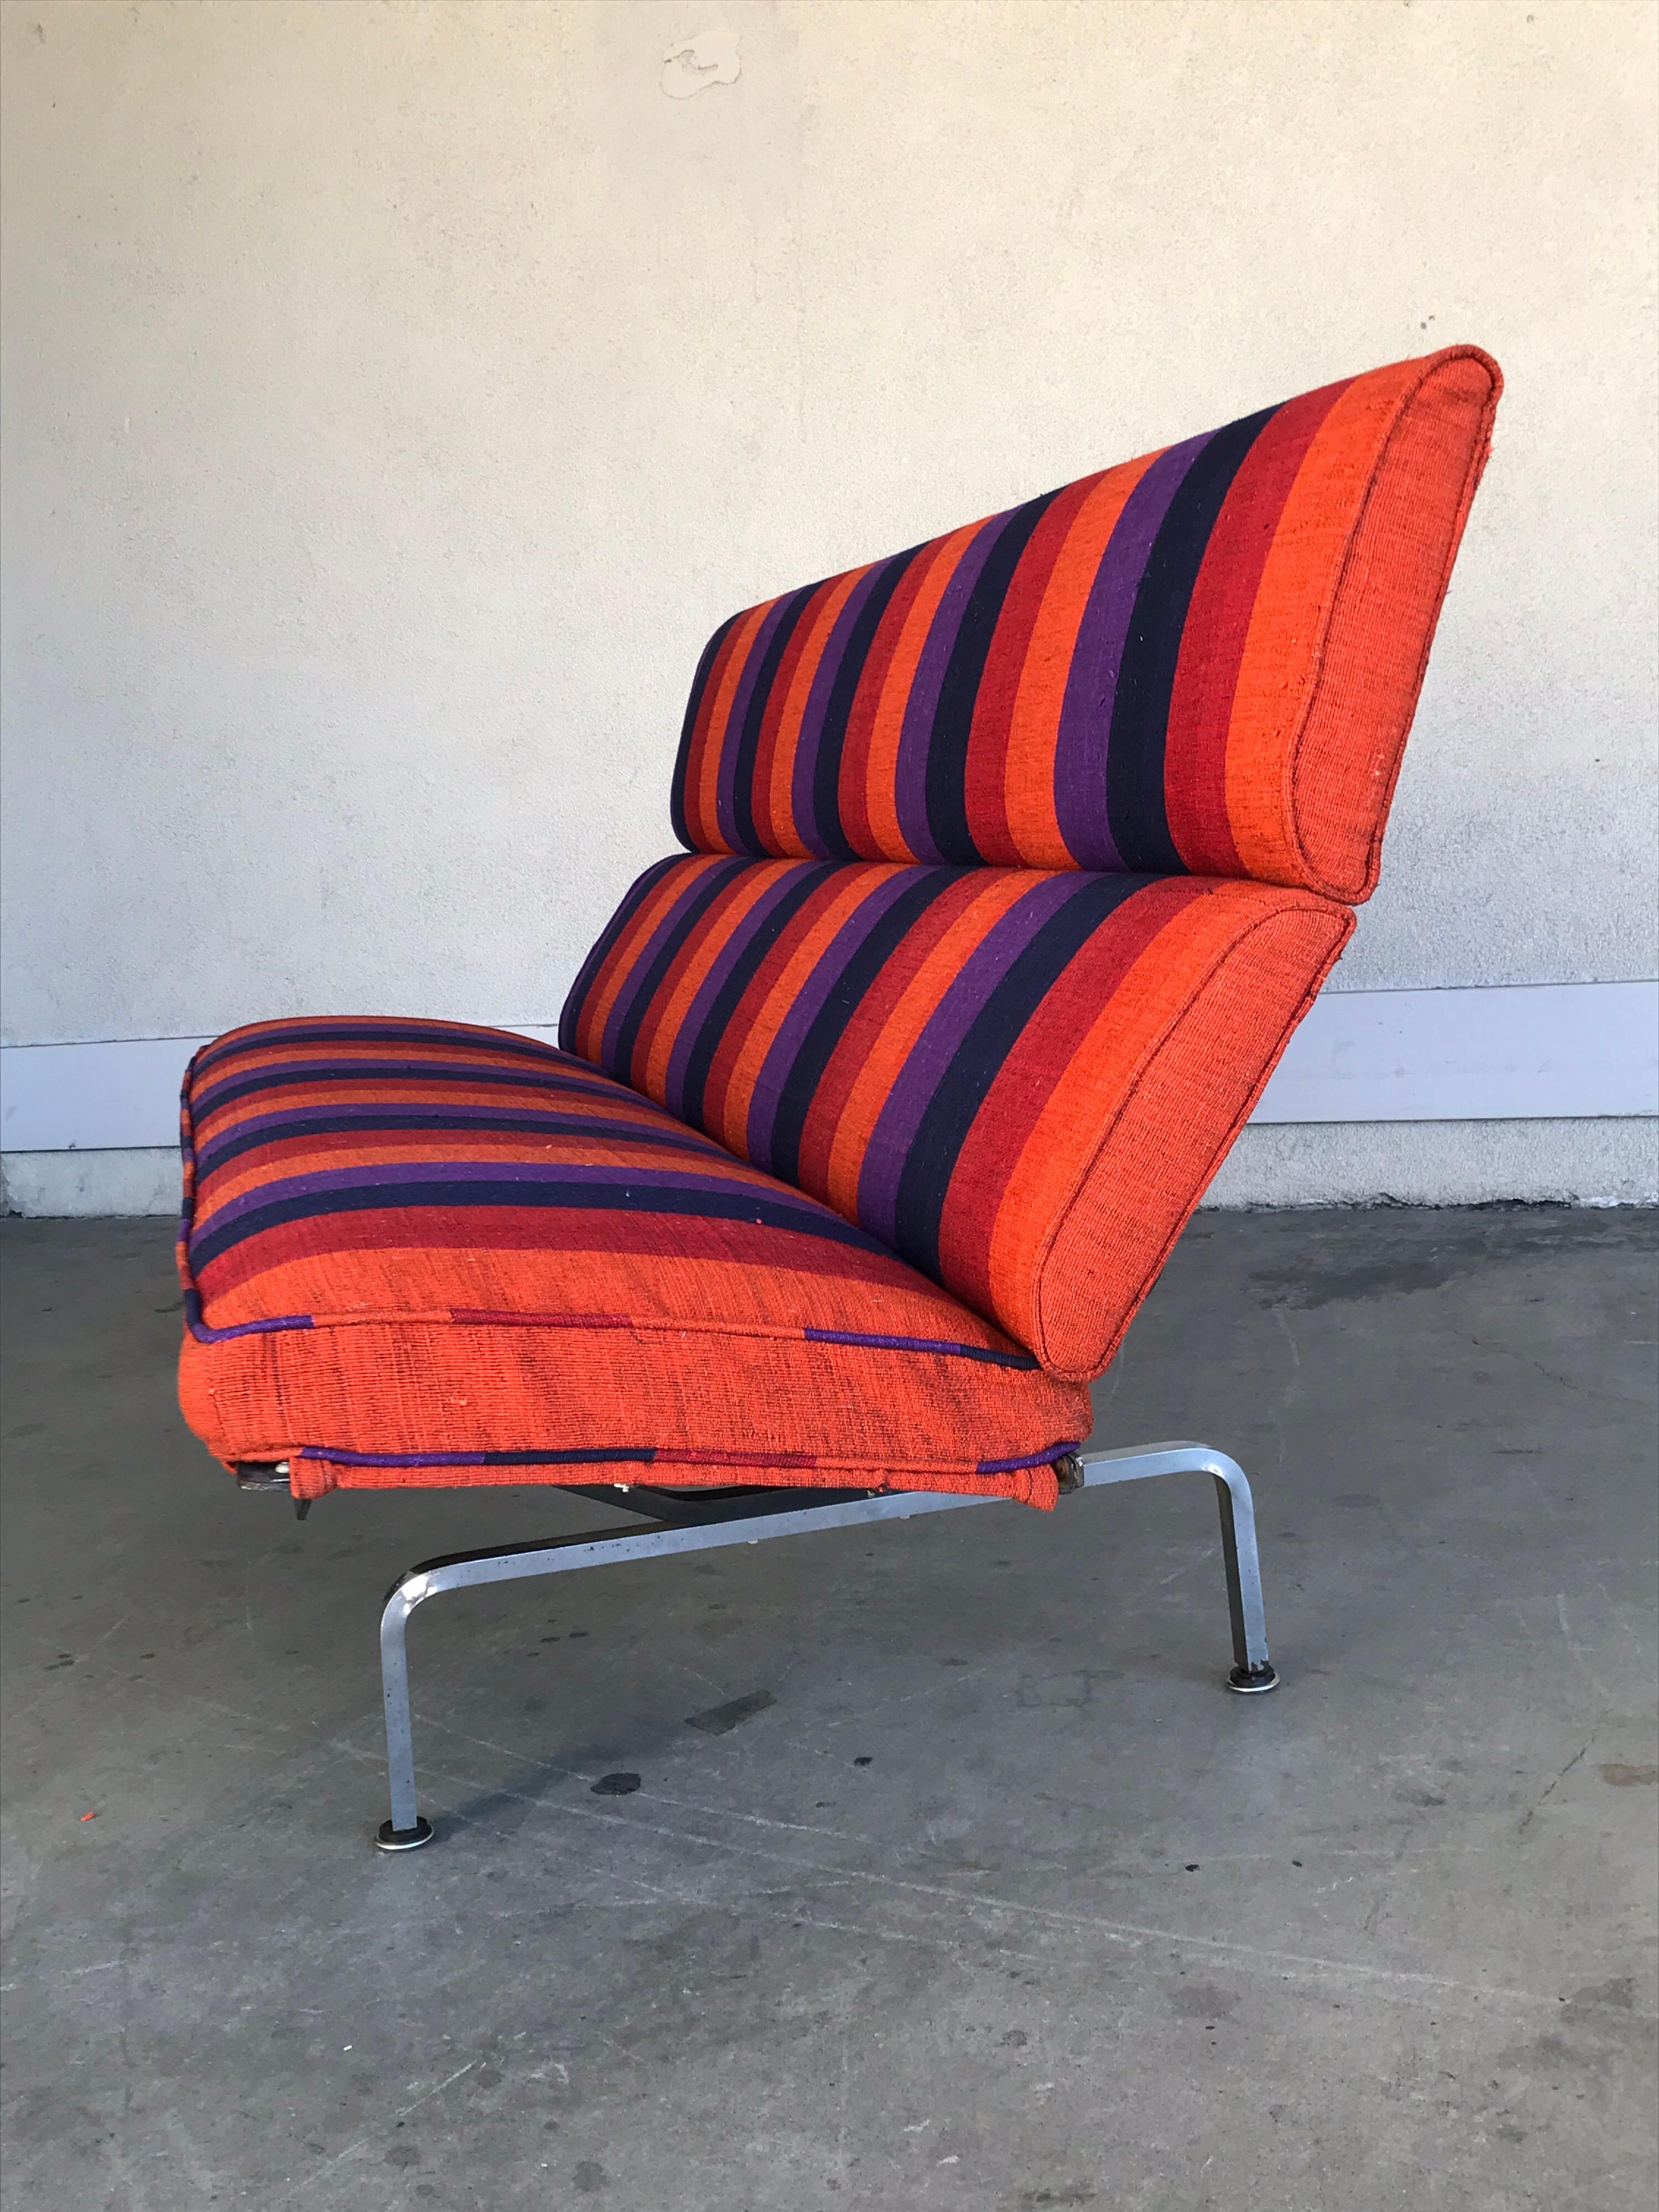 A classic Mid-Century Modern design.
It has been reupholstered with a dead-stock Alexander Girard Fabric from 1961.
The steel frame and plated steel base have minor wear and patina consistent with age and use, with original screws too.
The foot